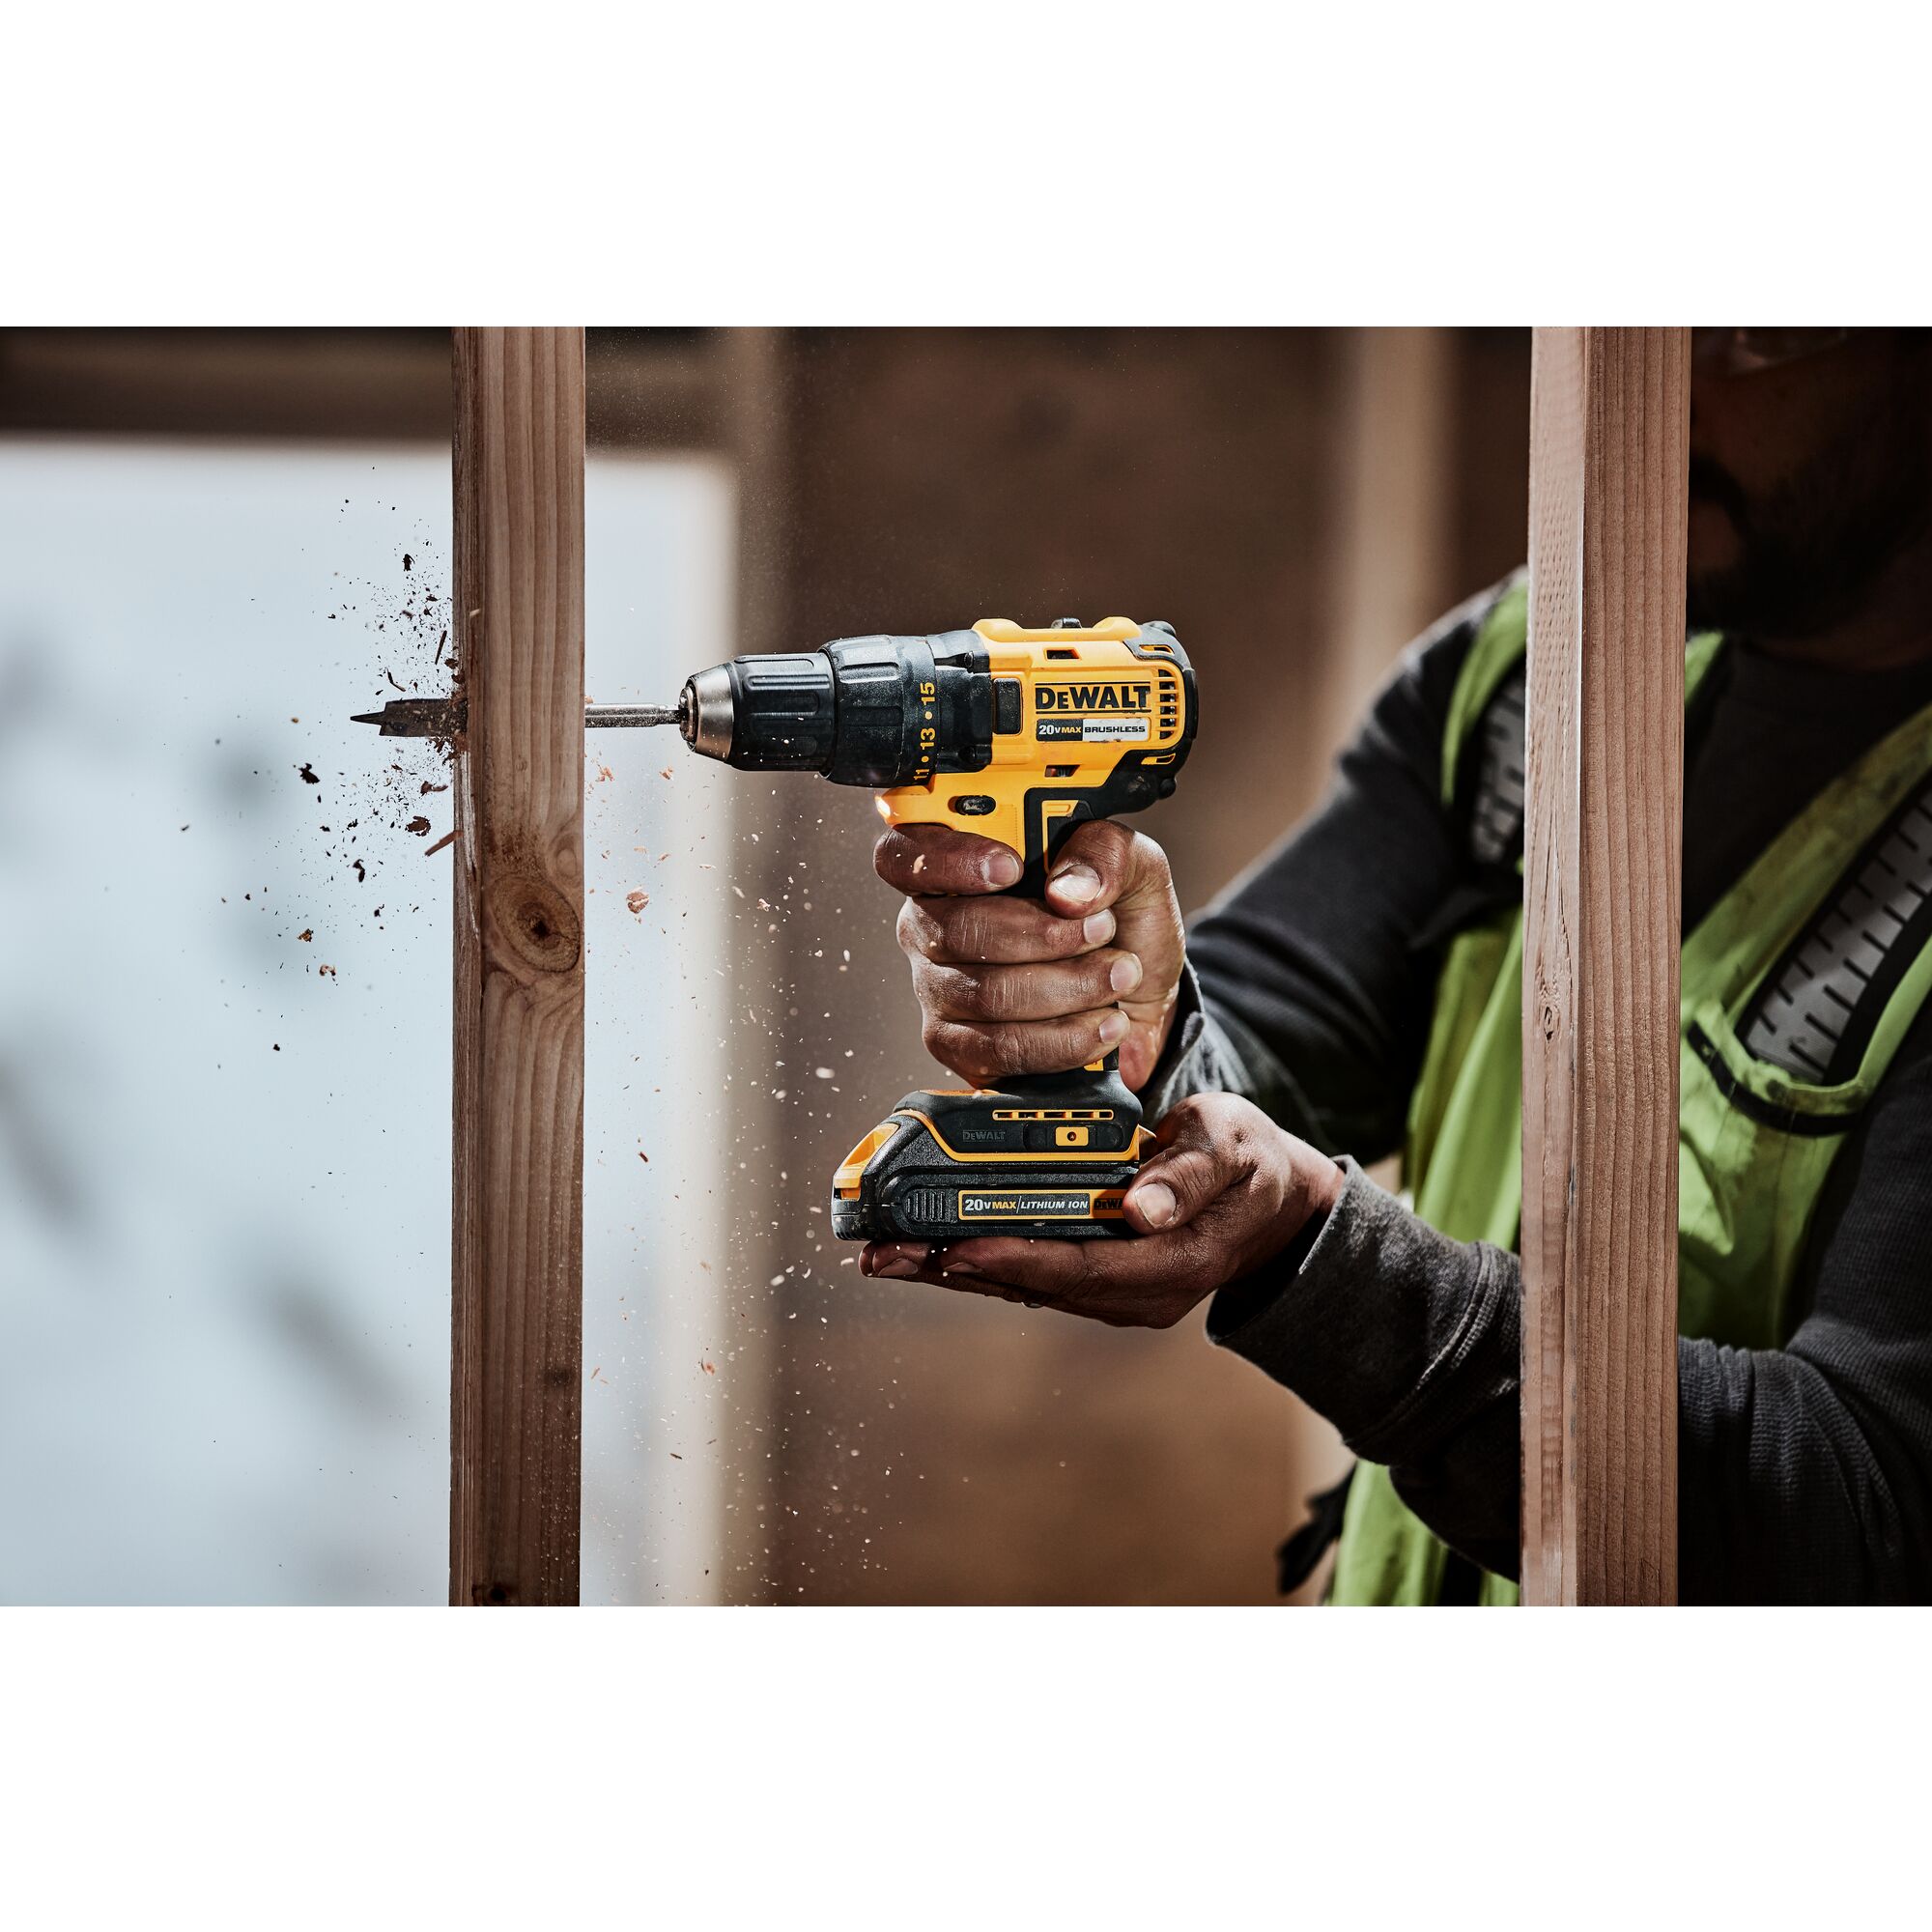 20V MAX* XR® Brushless Cordless Compact Drill/Driver and Impact